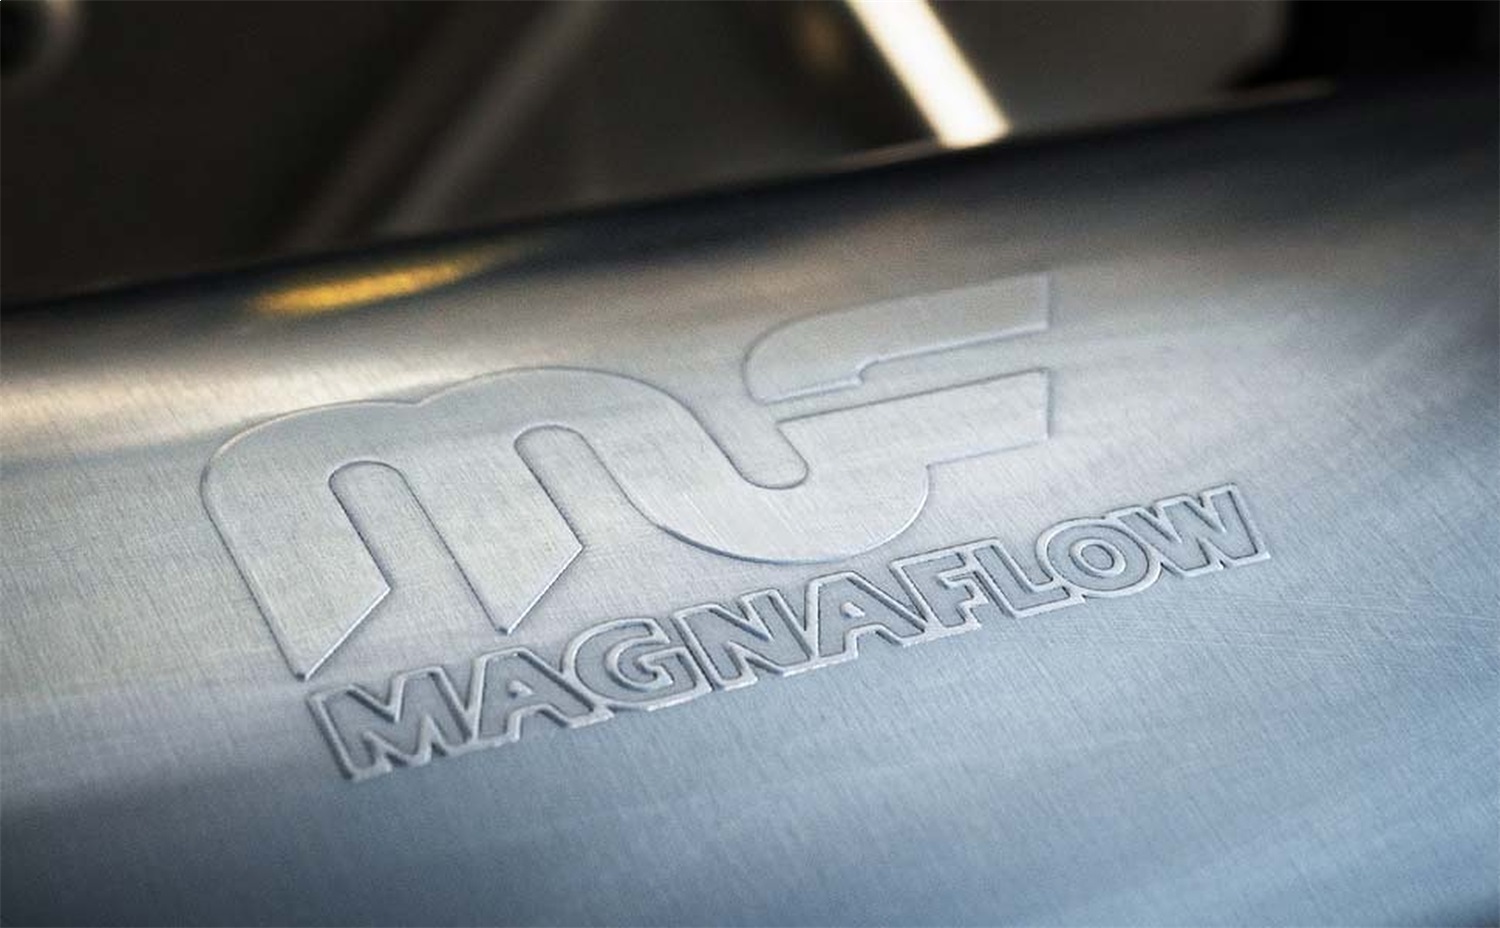 MagnaFlow Exhaust Products Magnaflow Performance Exhaust 14210 Stainless Steel Muffler